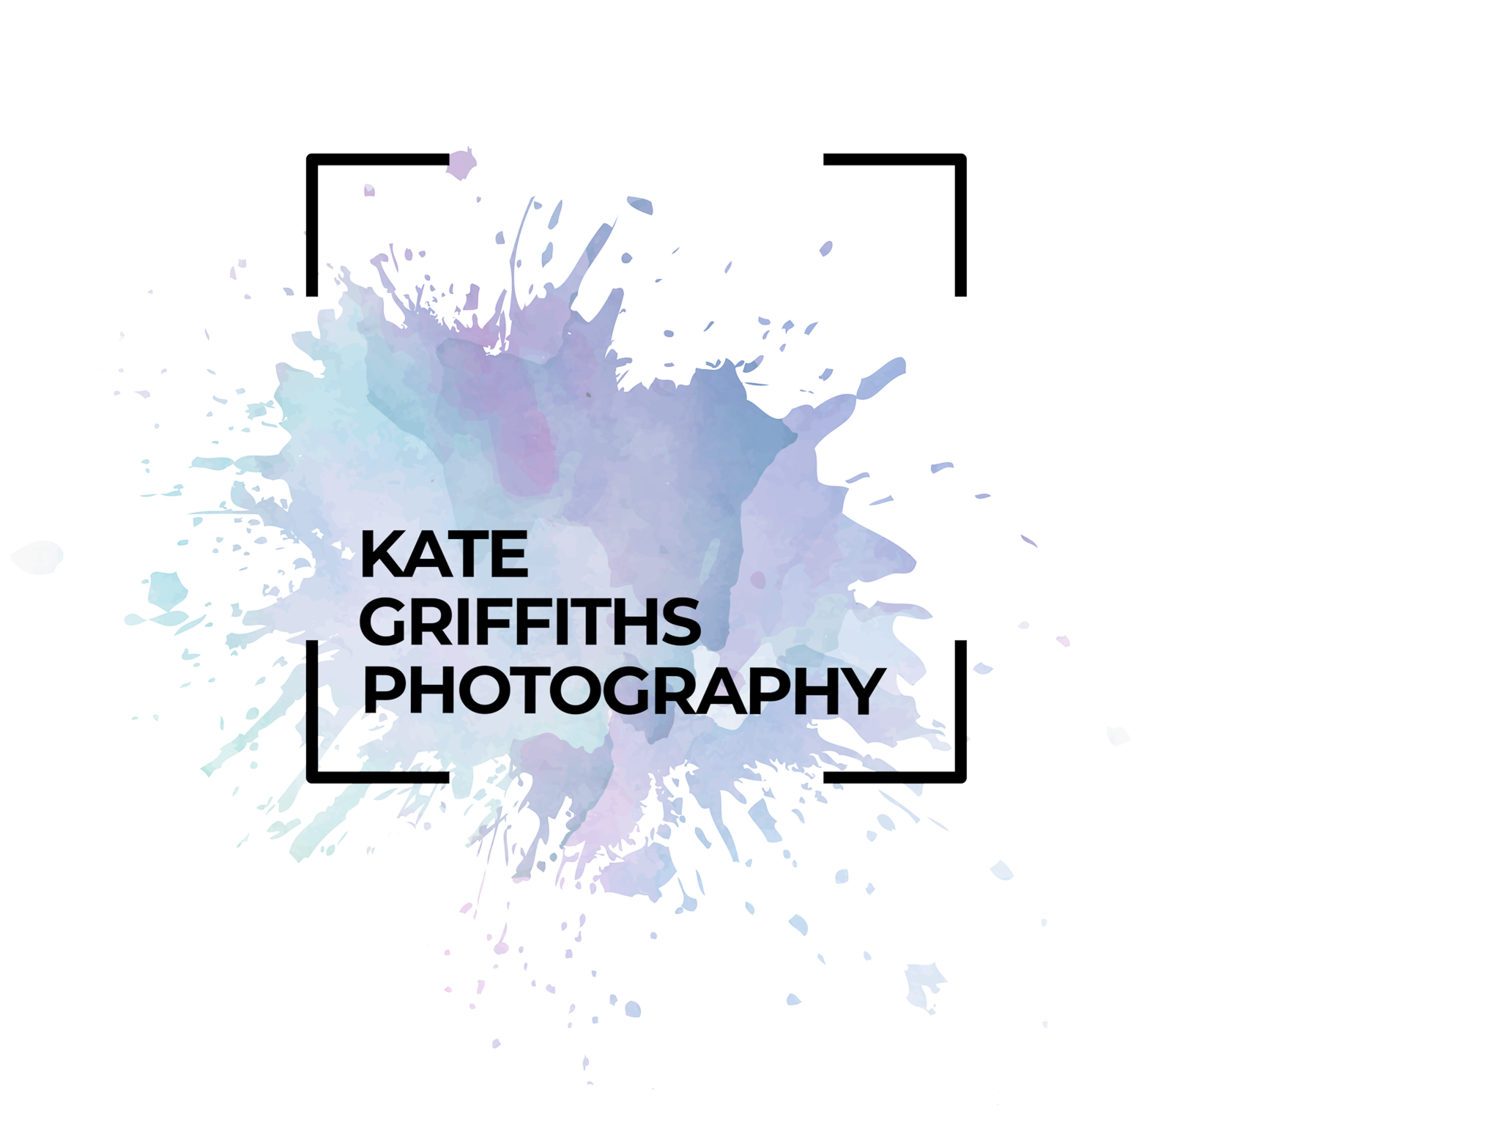 Kate Griffiths Photography